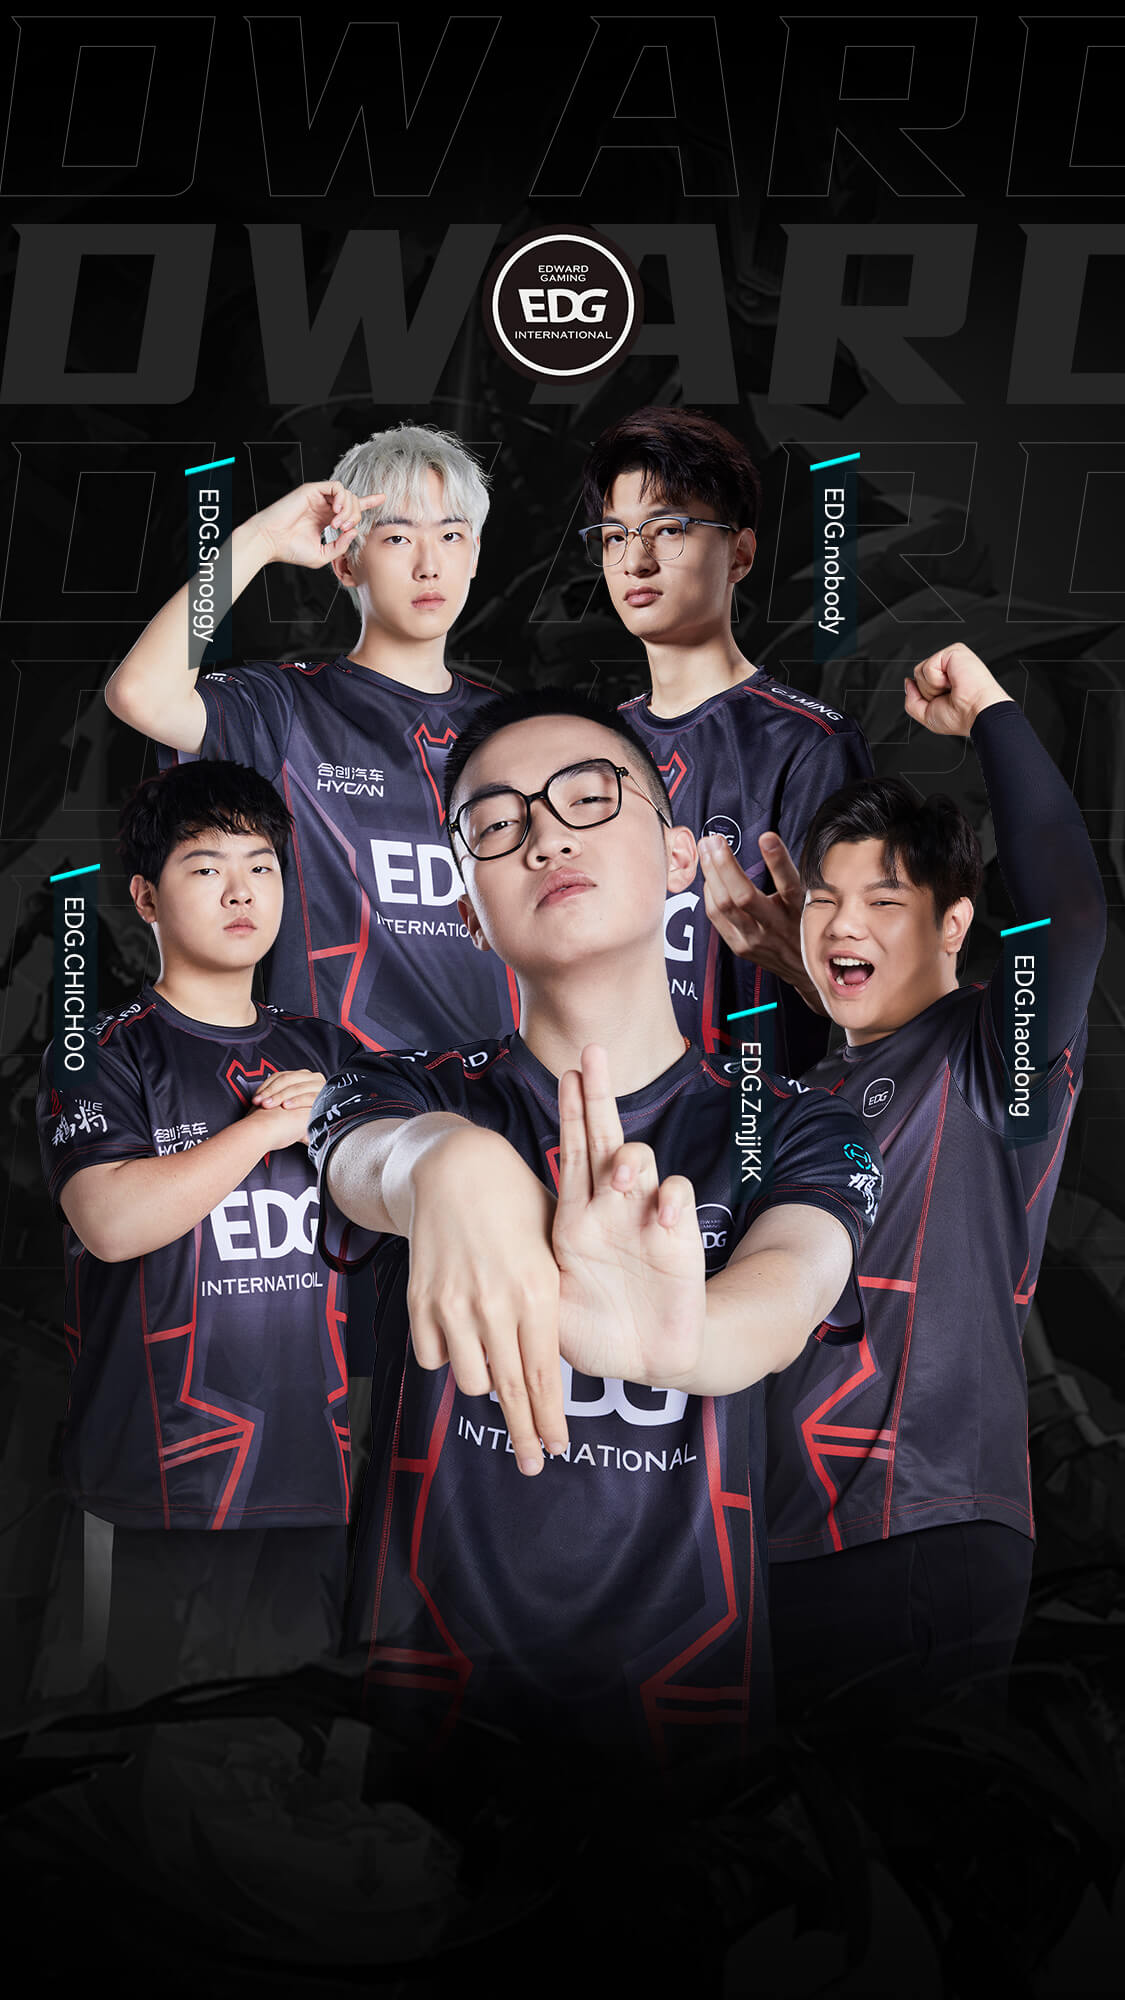 HECATE Collaboration EDG